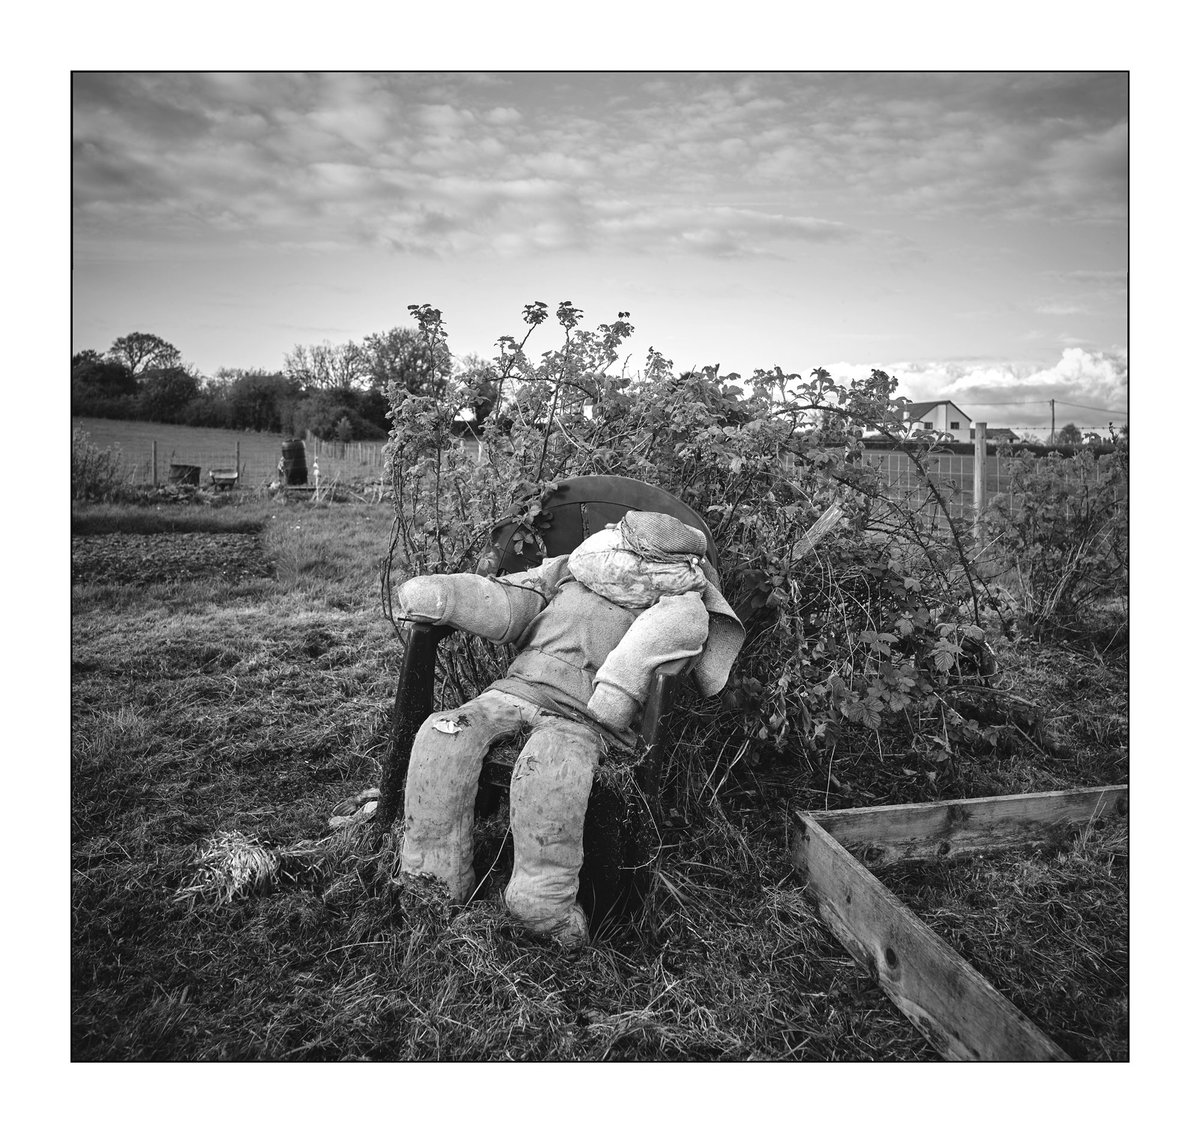 PICTURE OF THE DAY - That Friday feeling. #pictureoftheday #PhaseOne #CamboWRS #CarlZeiss #urbanphotography #bnw #bnwphotography #fineartphotography #ItsFriday #AllotmentLife #blackandwhite #blackandwhitephotography @rosie_thomo9